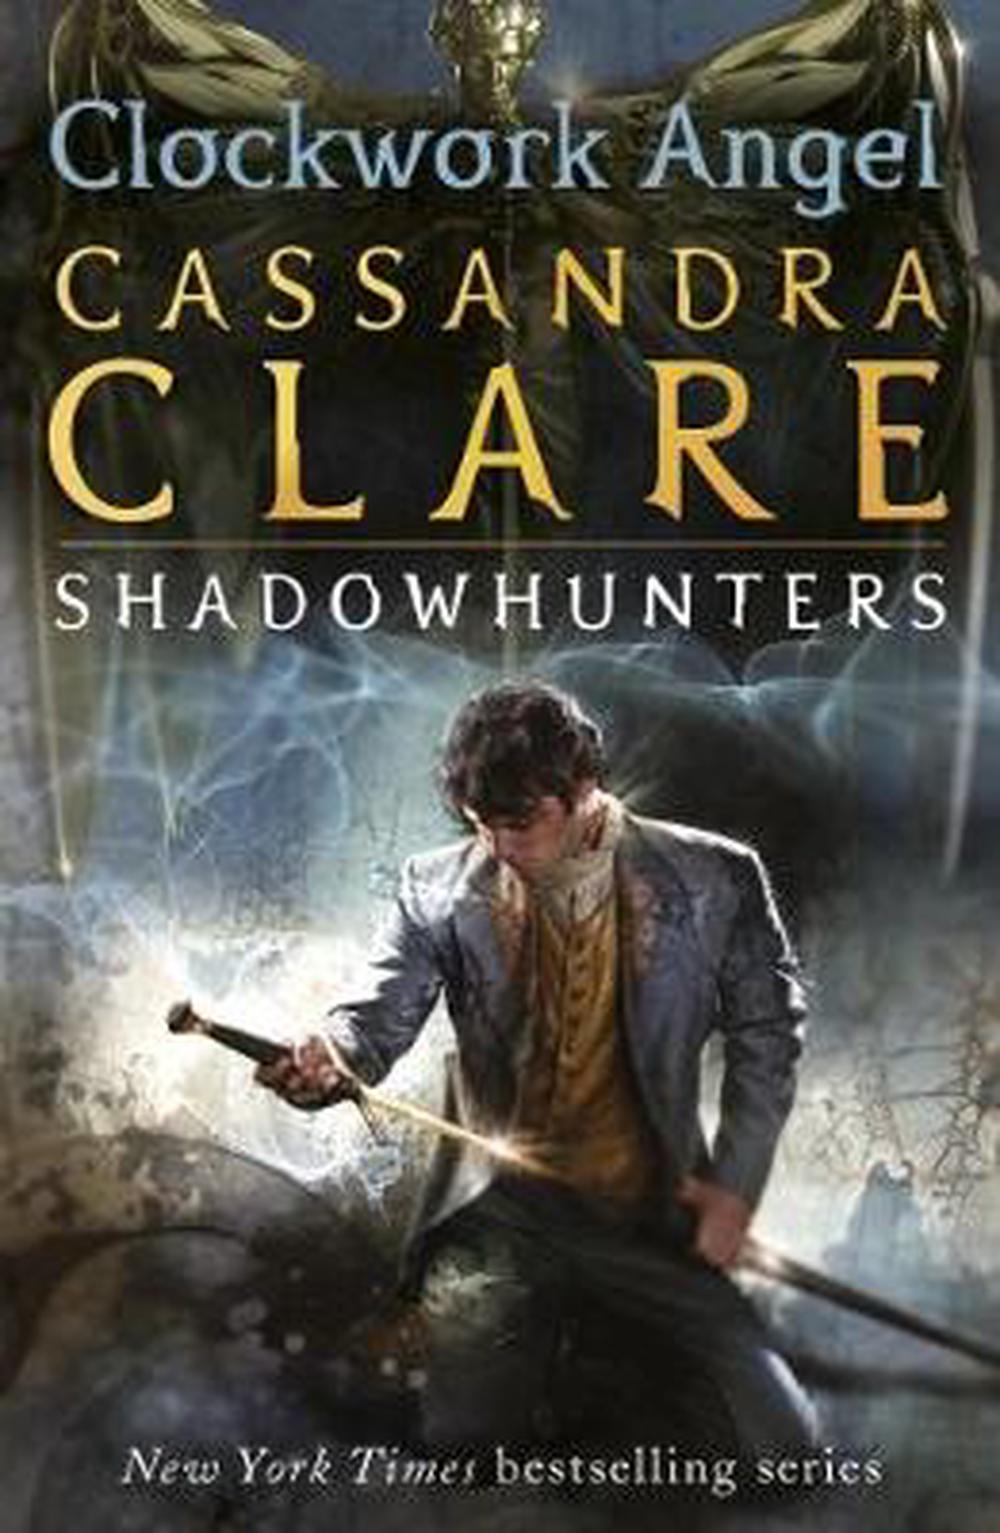 The　Angel　online　at　9781406330342　Buy　by　Paperback,　Cassandra　Clare,　Clockwork　1:　Devices　Infernal　Nile